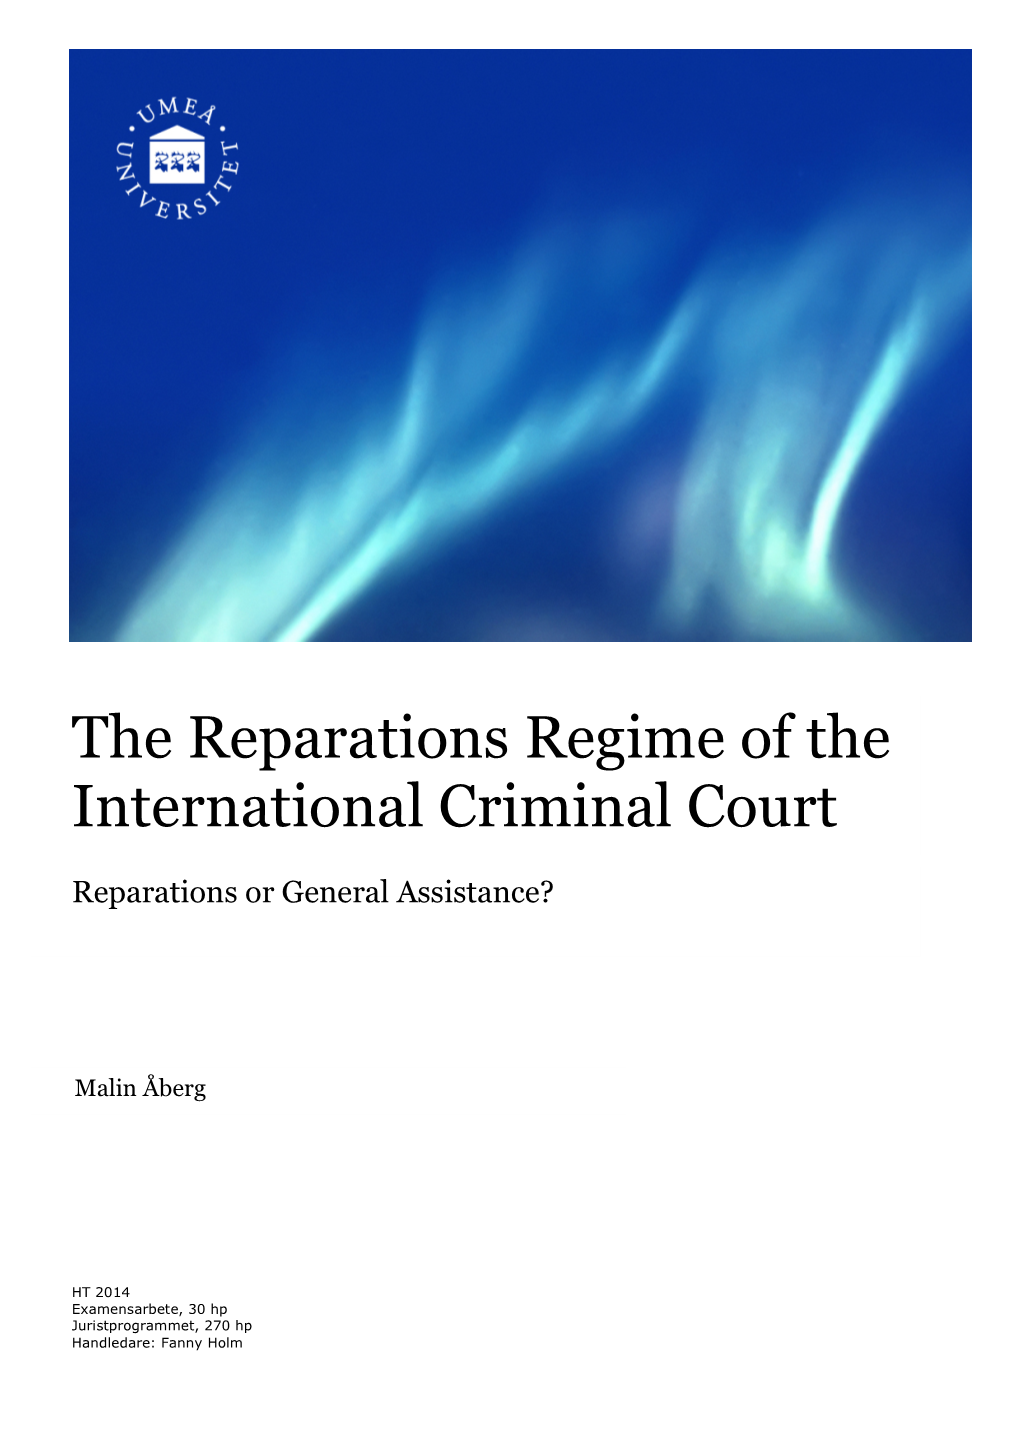 The Reparations Regime of the International Criminal Court